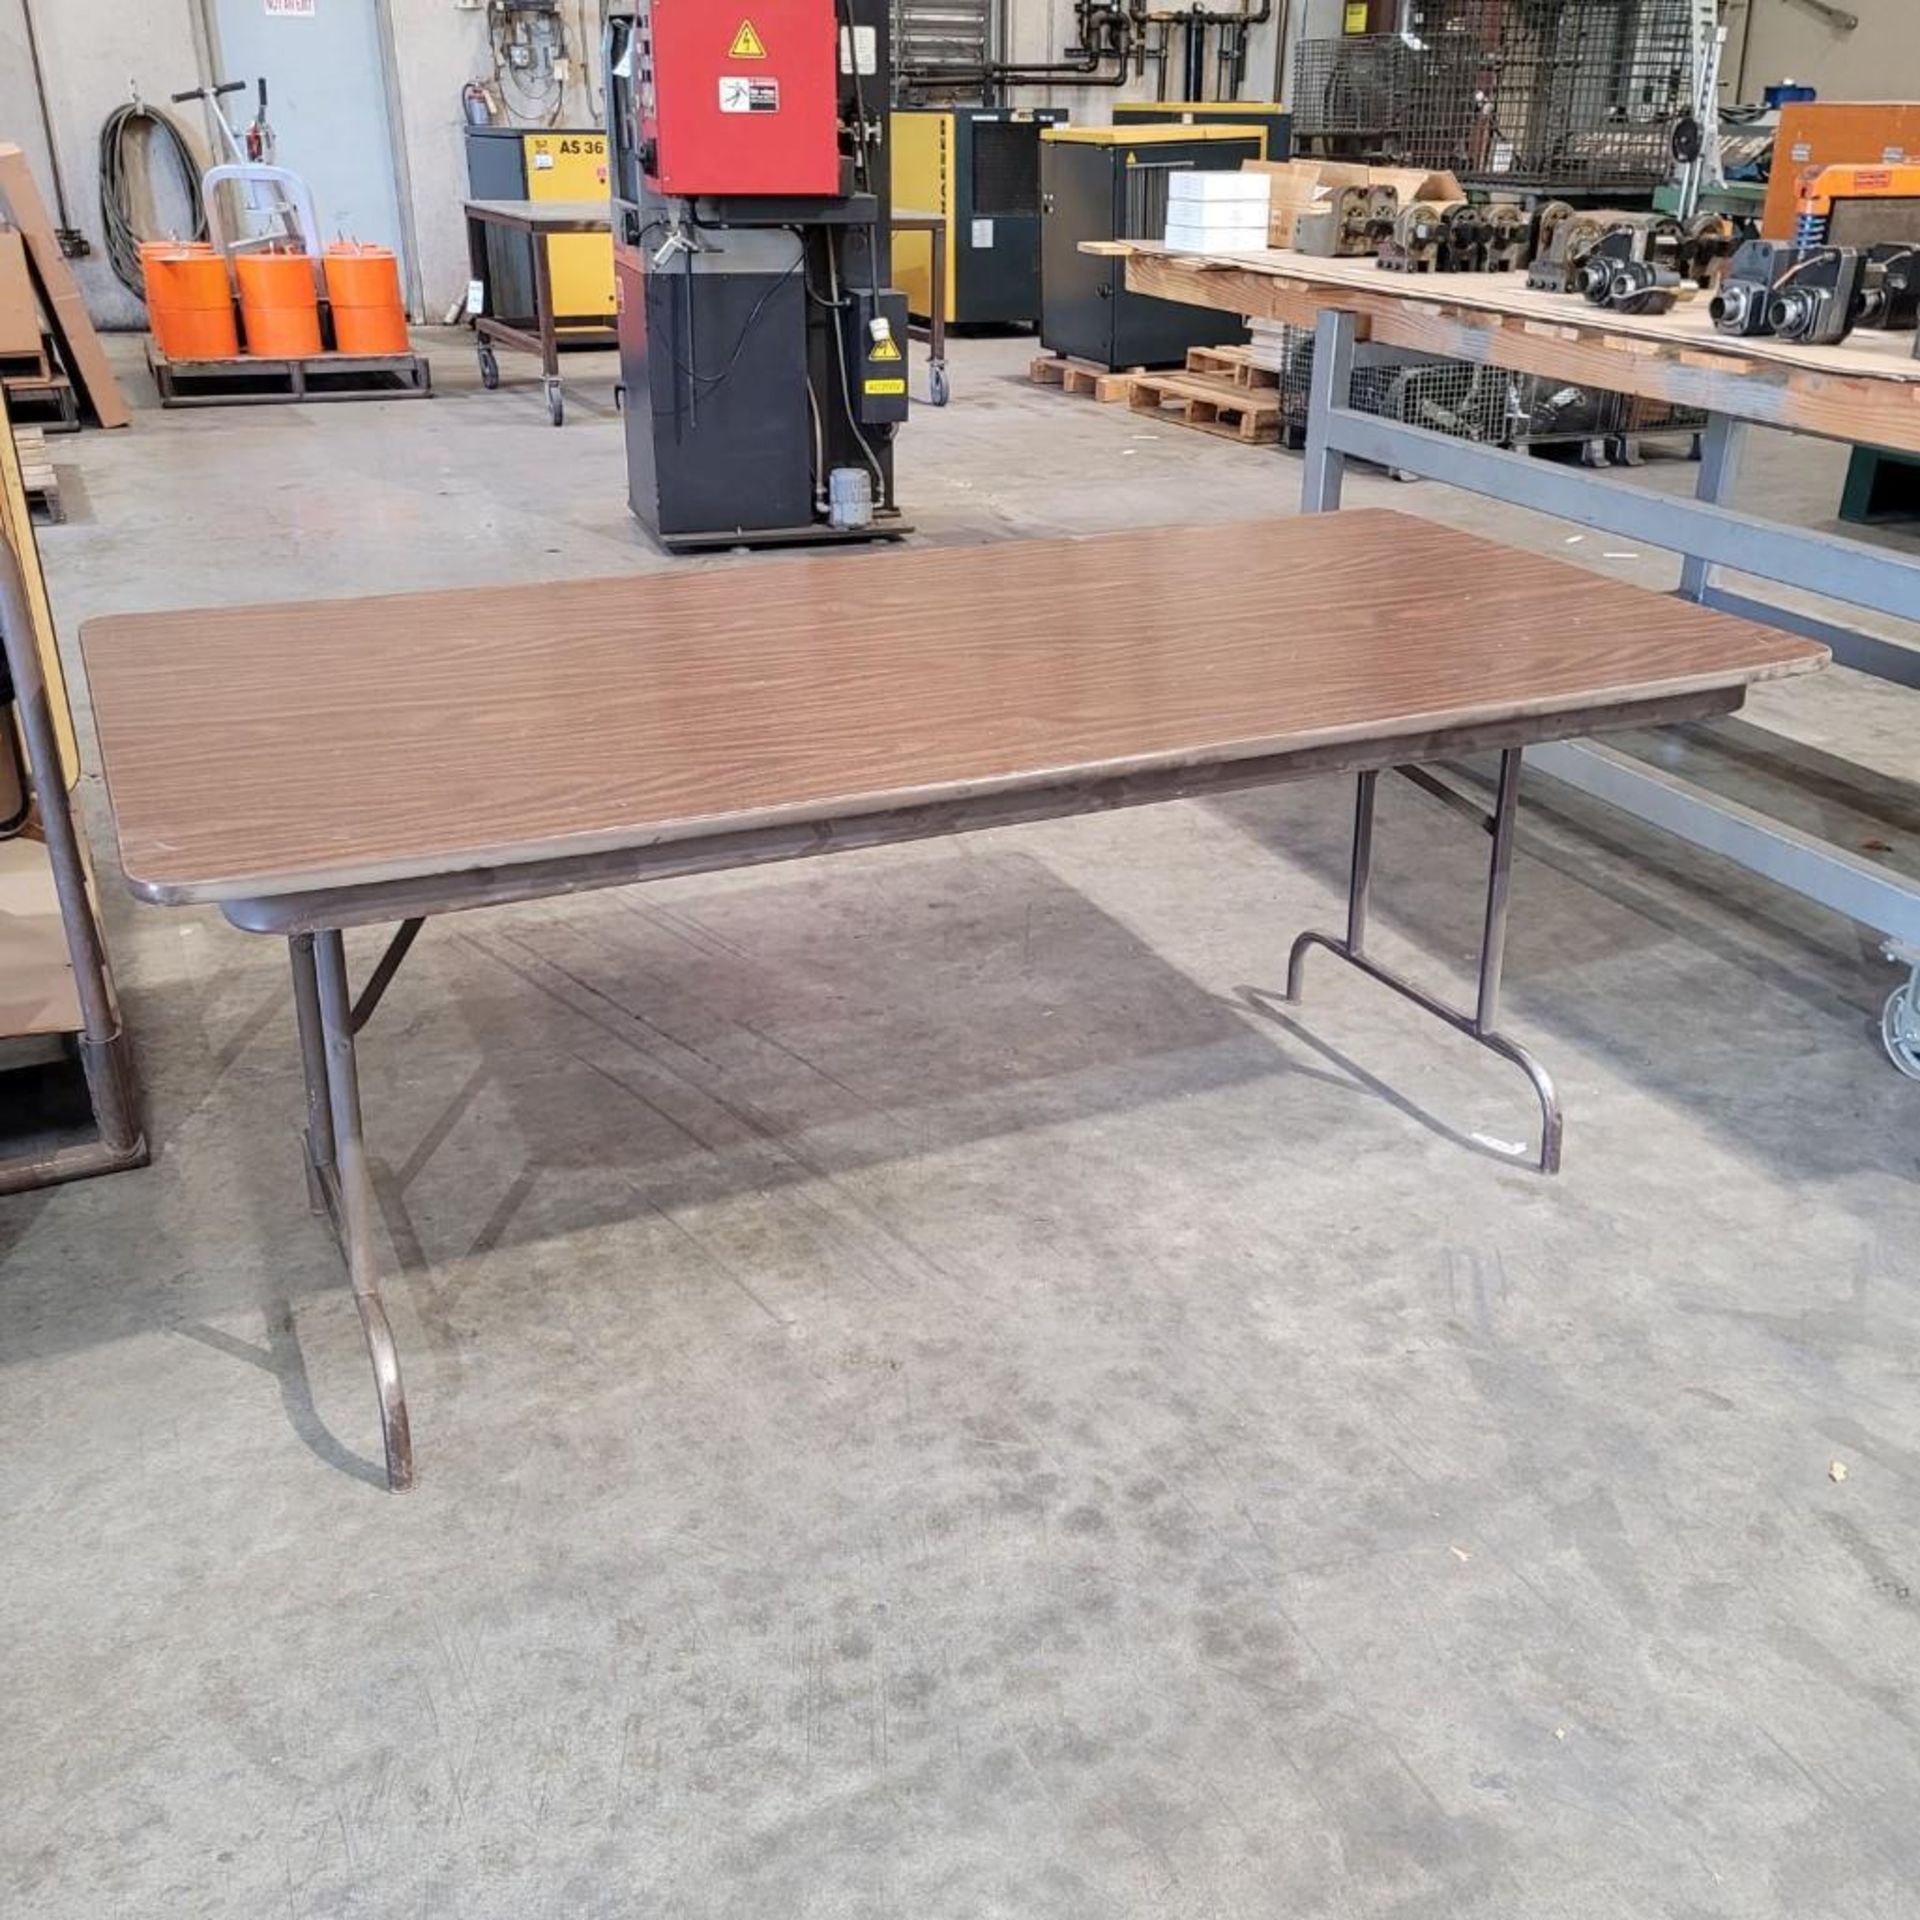 (2) 30" x 72" Table with Folding Legs